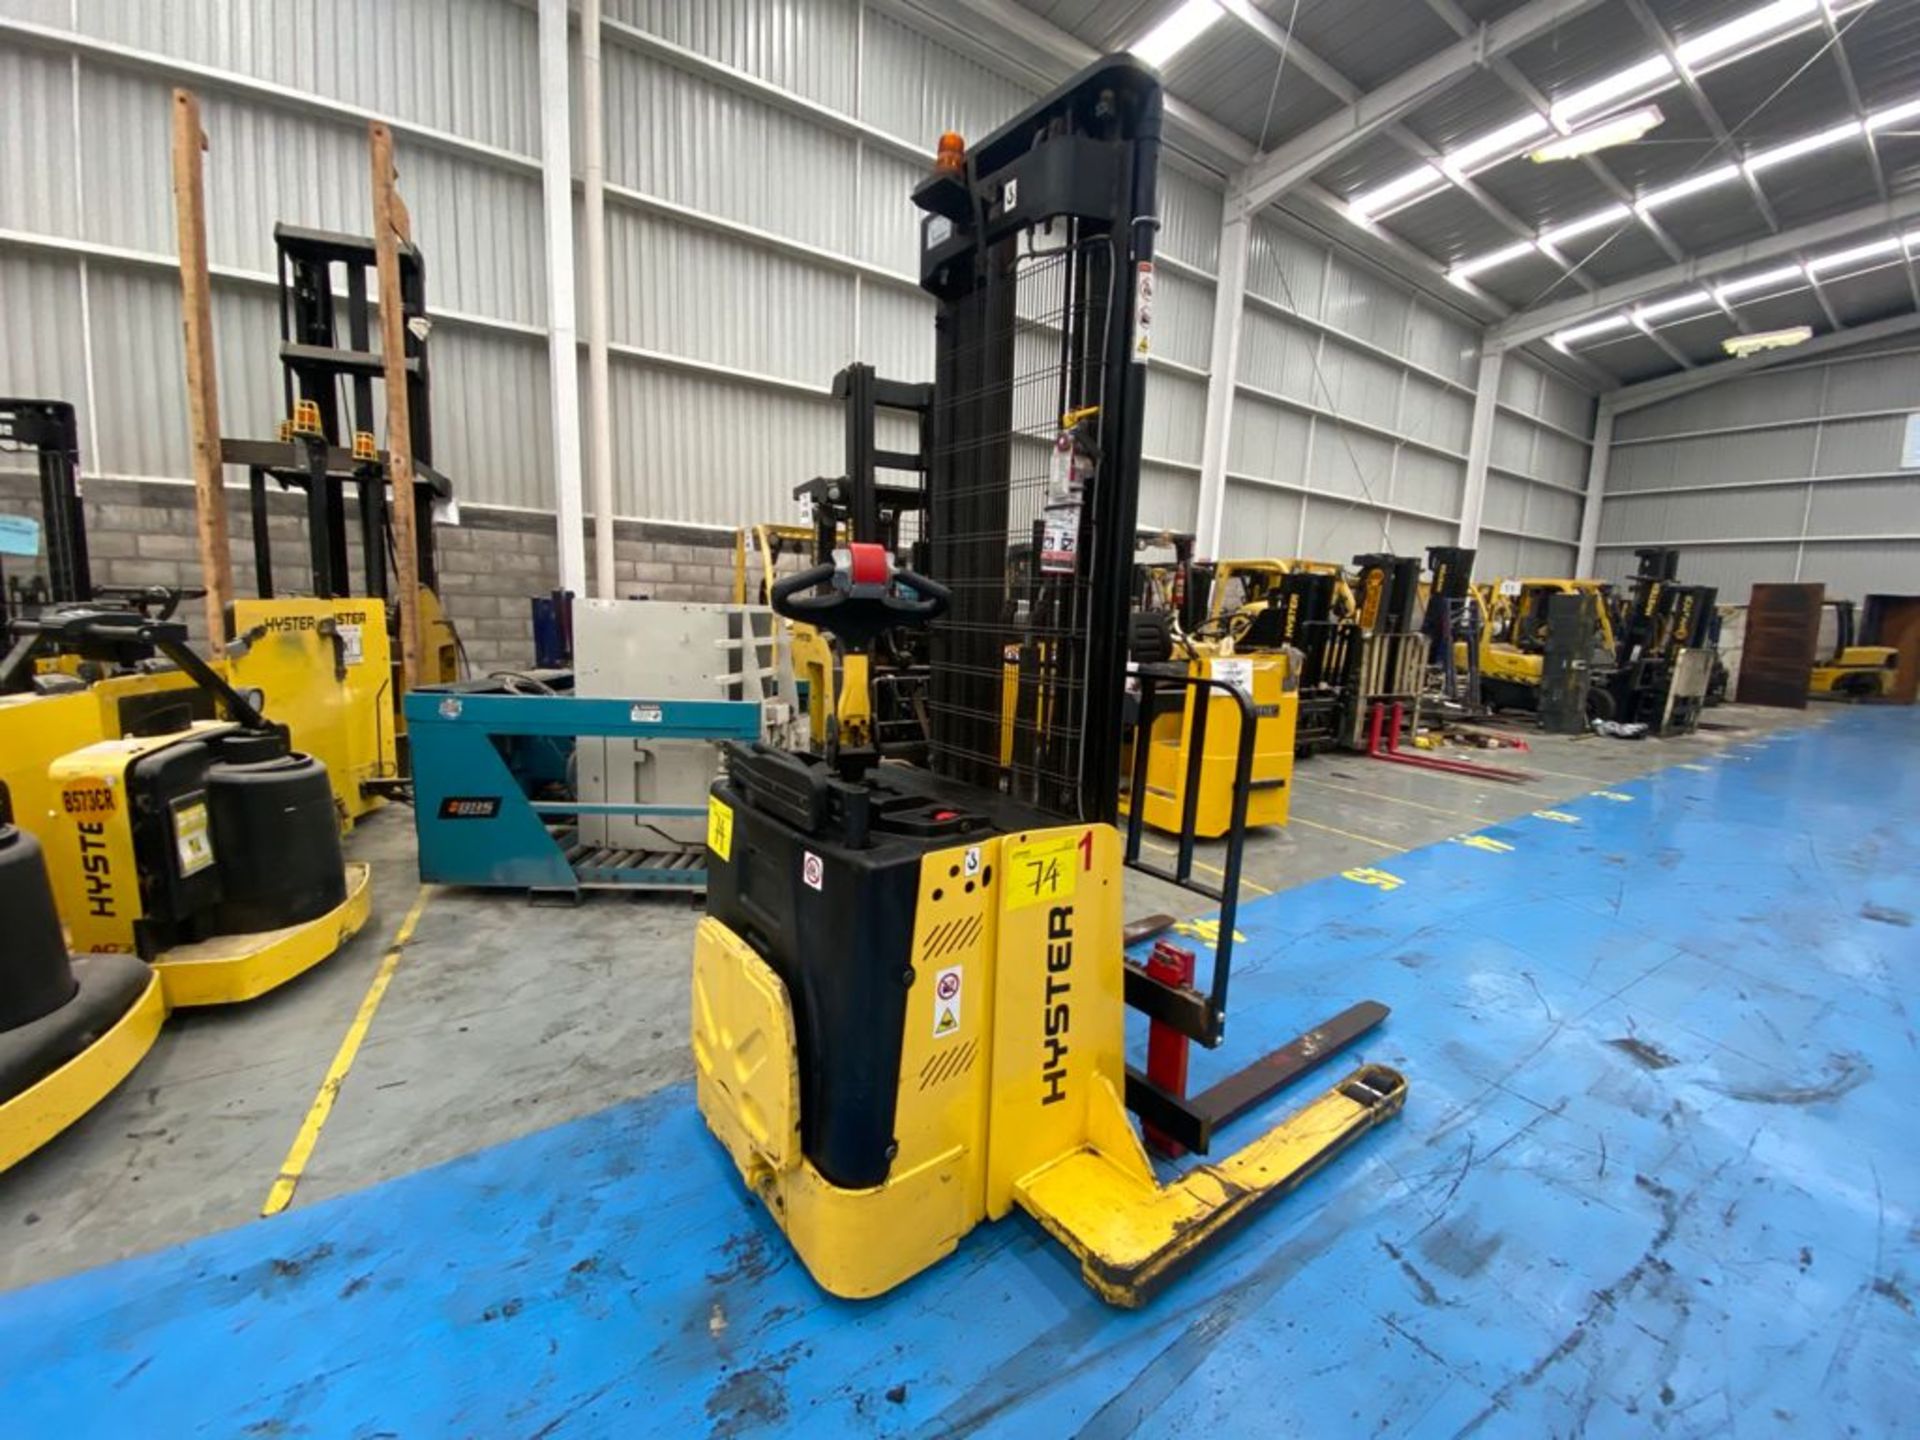 Hyster Electric Platform High Lift Stacker Model S1.5S, SN C442T03146R, Year 2017, 1.5 tons capacity - Image 33 of 34